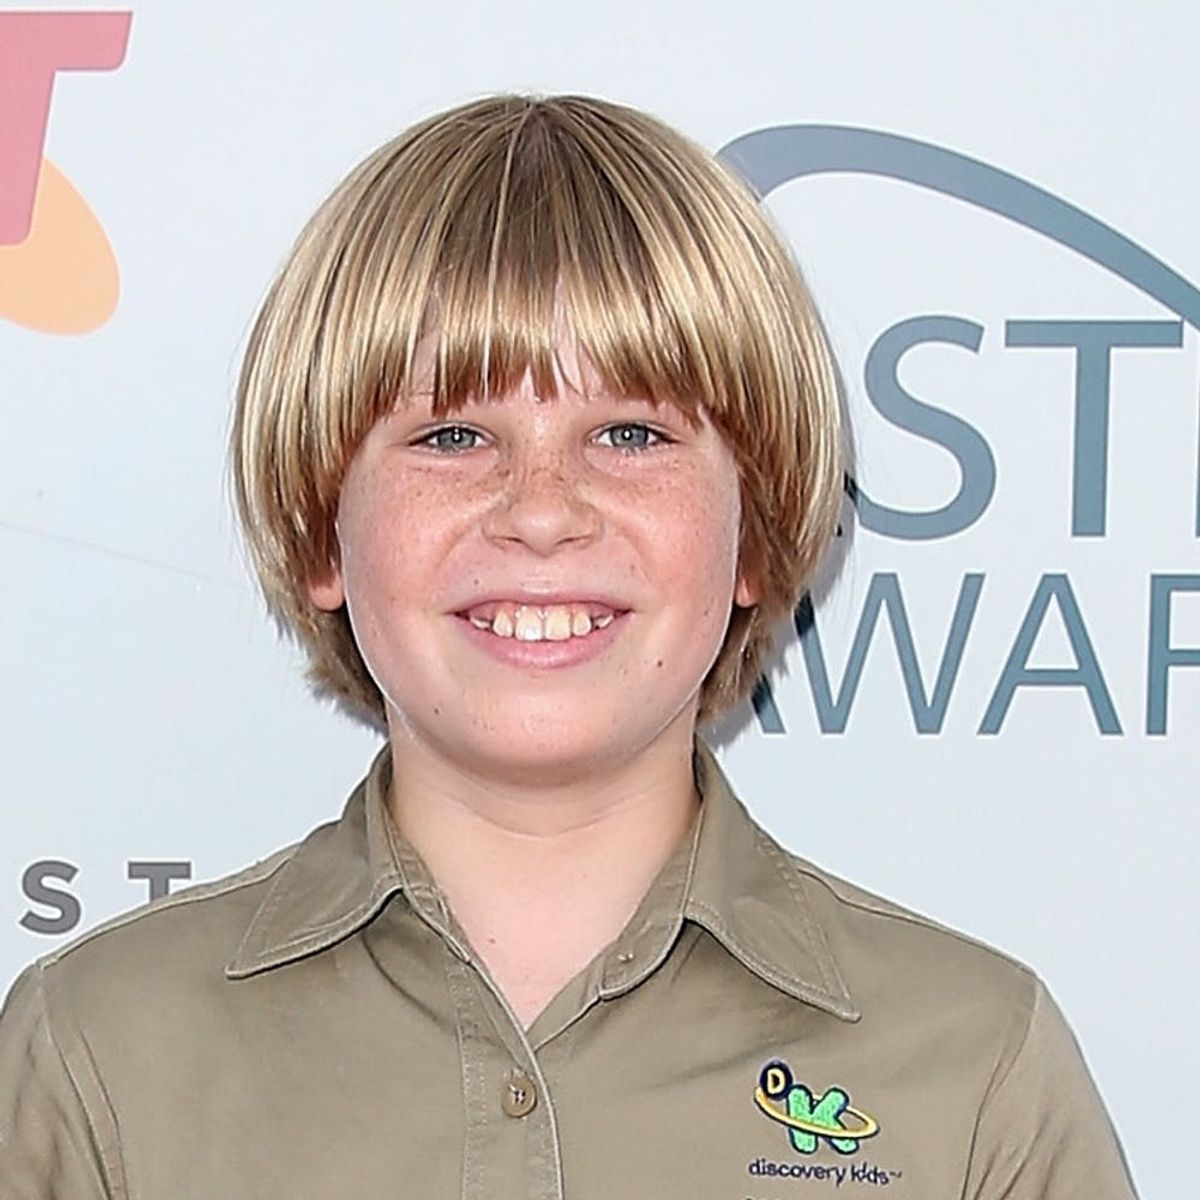 Steve Irwin’s Son Robert Is Recovering from Emergency Appendix Surgery